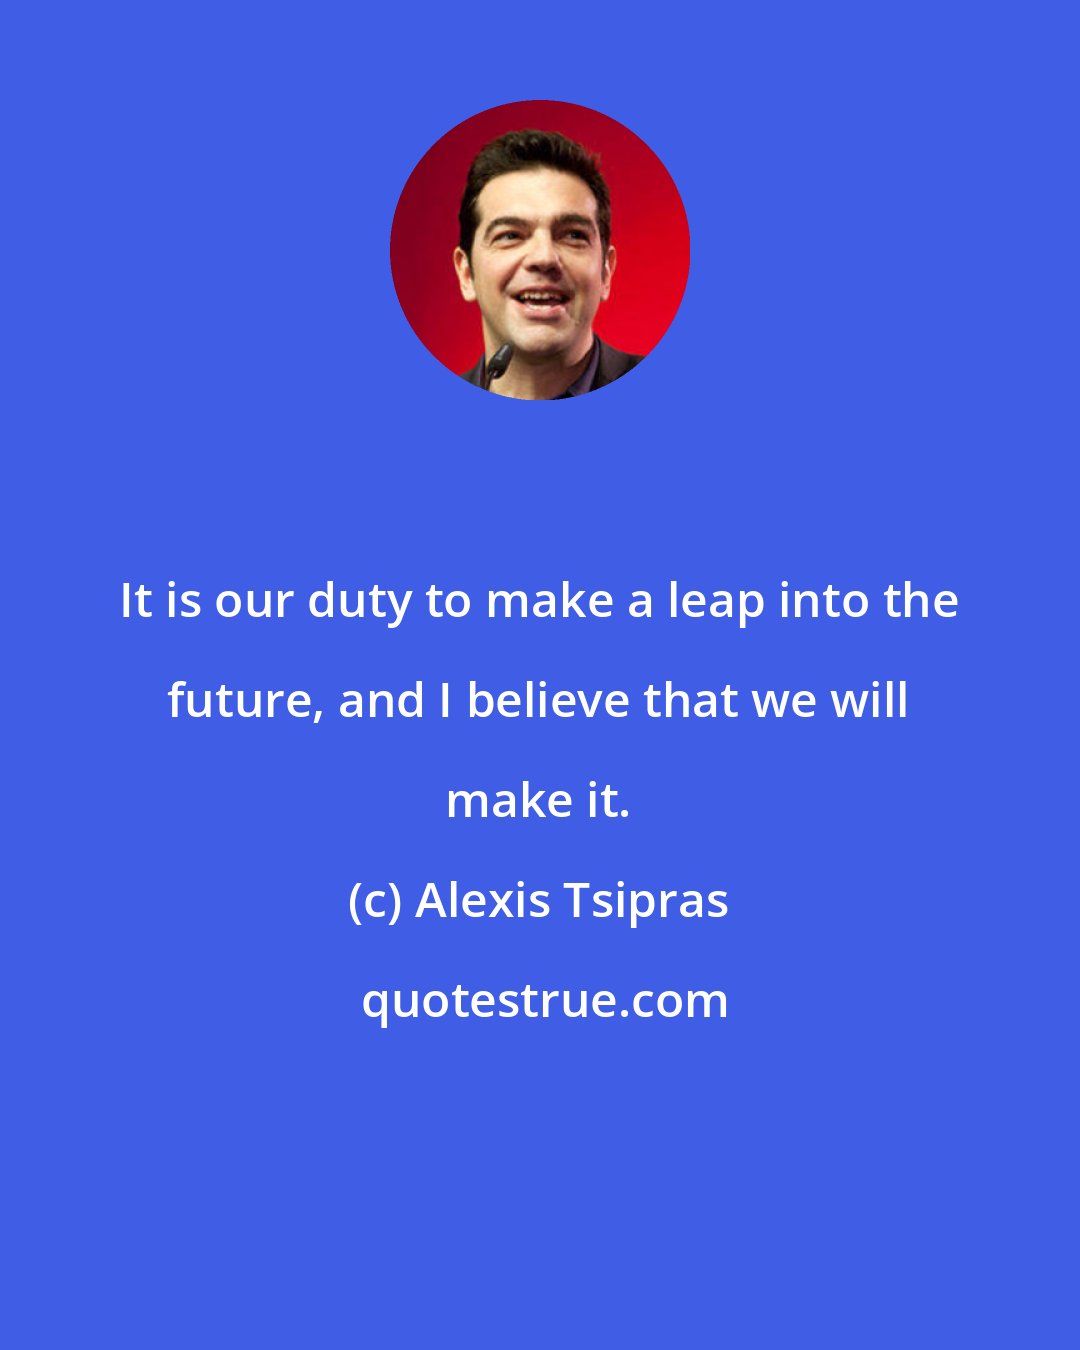 Alexis Tsipras: It is our duty to make a leap into the future, and I believe that we will make it.